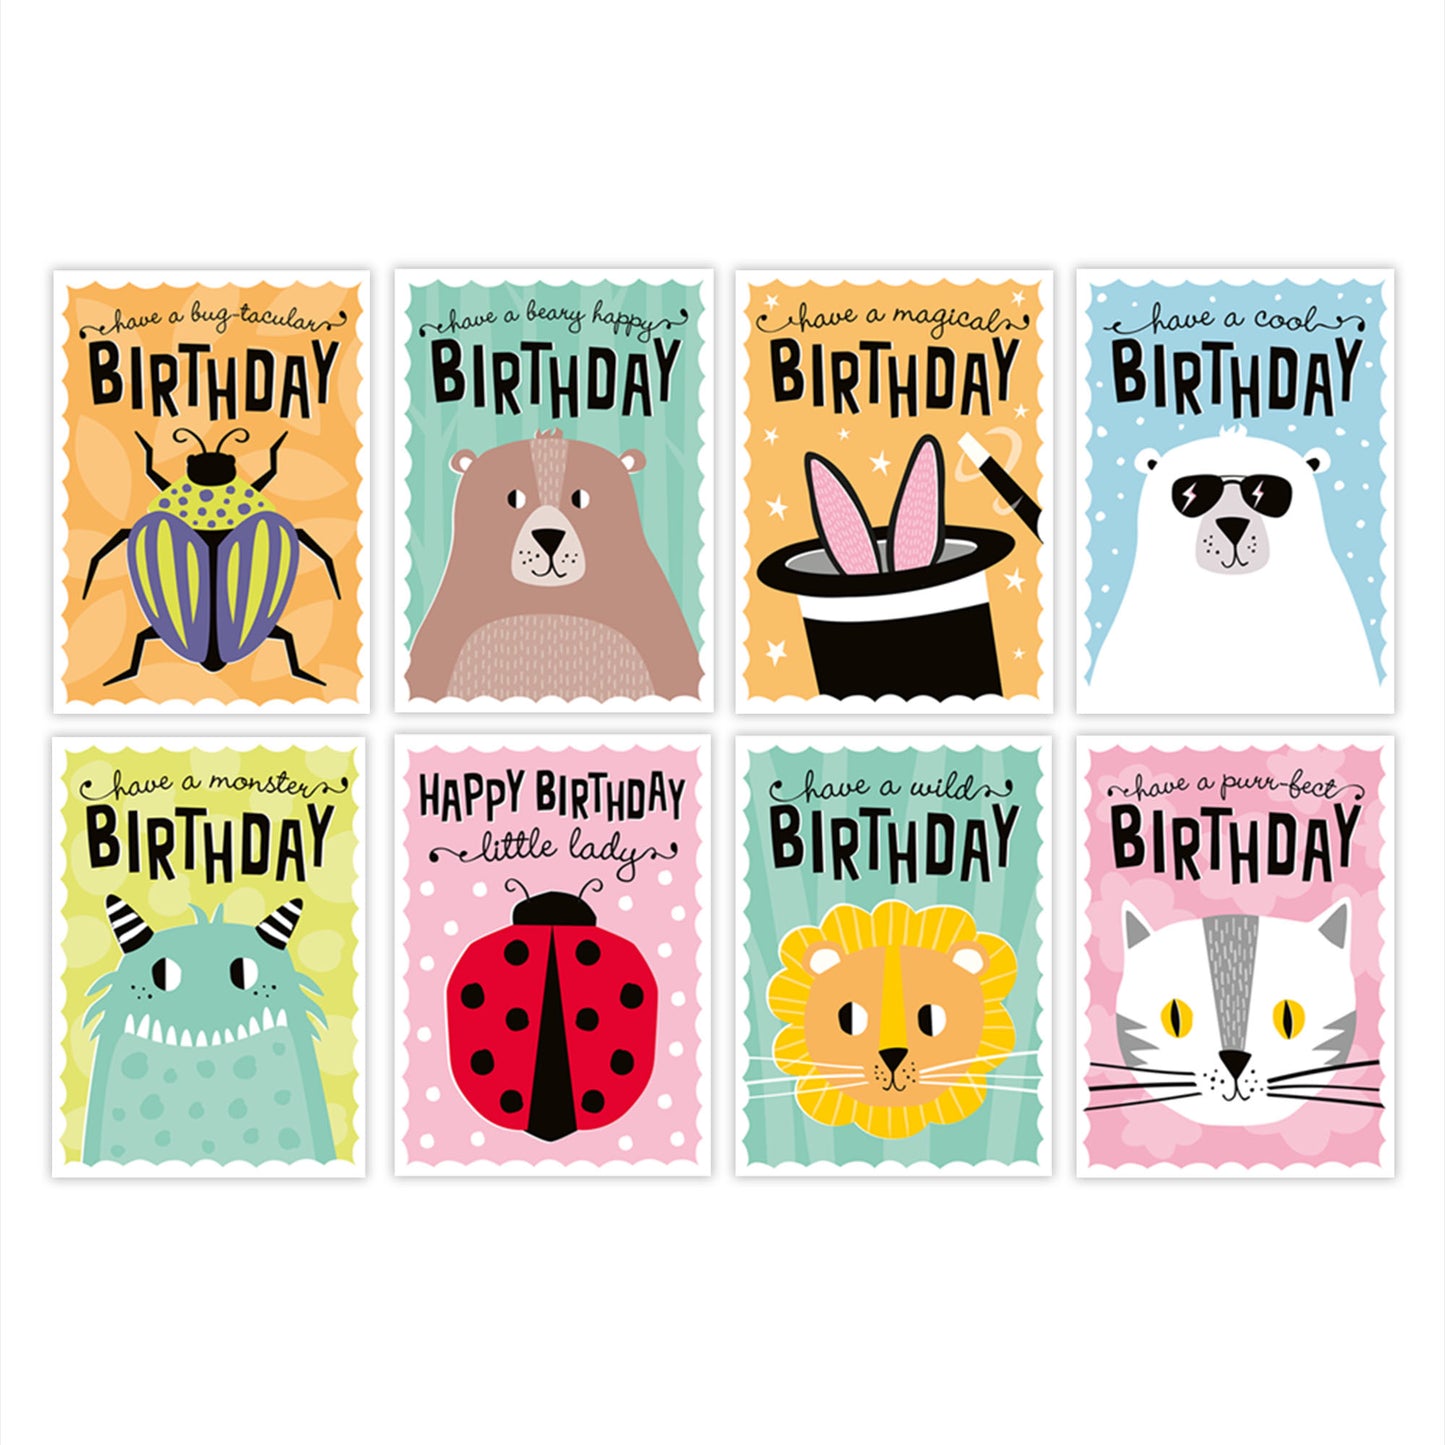 Kids birthday card pack - eight mixed designs